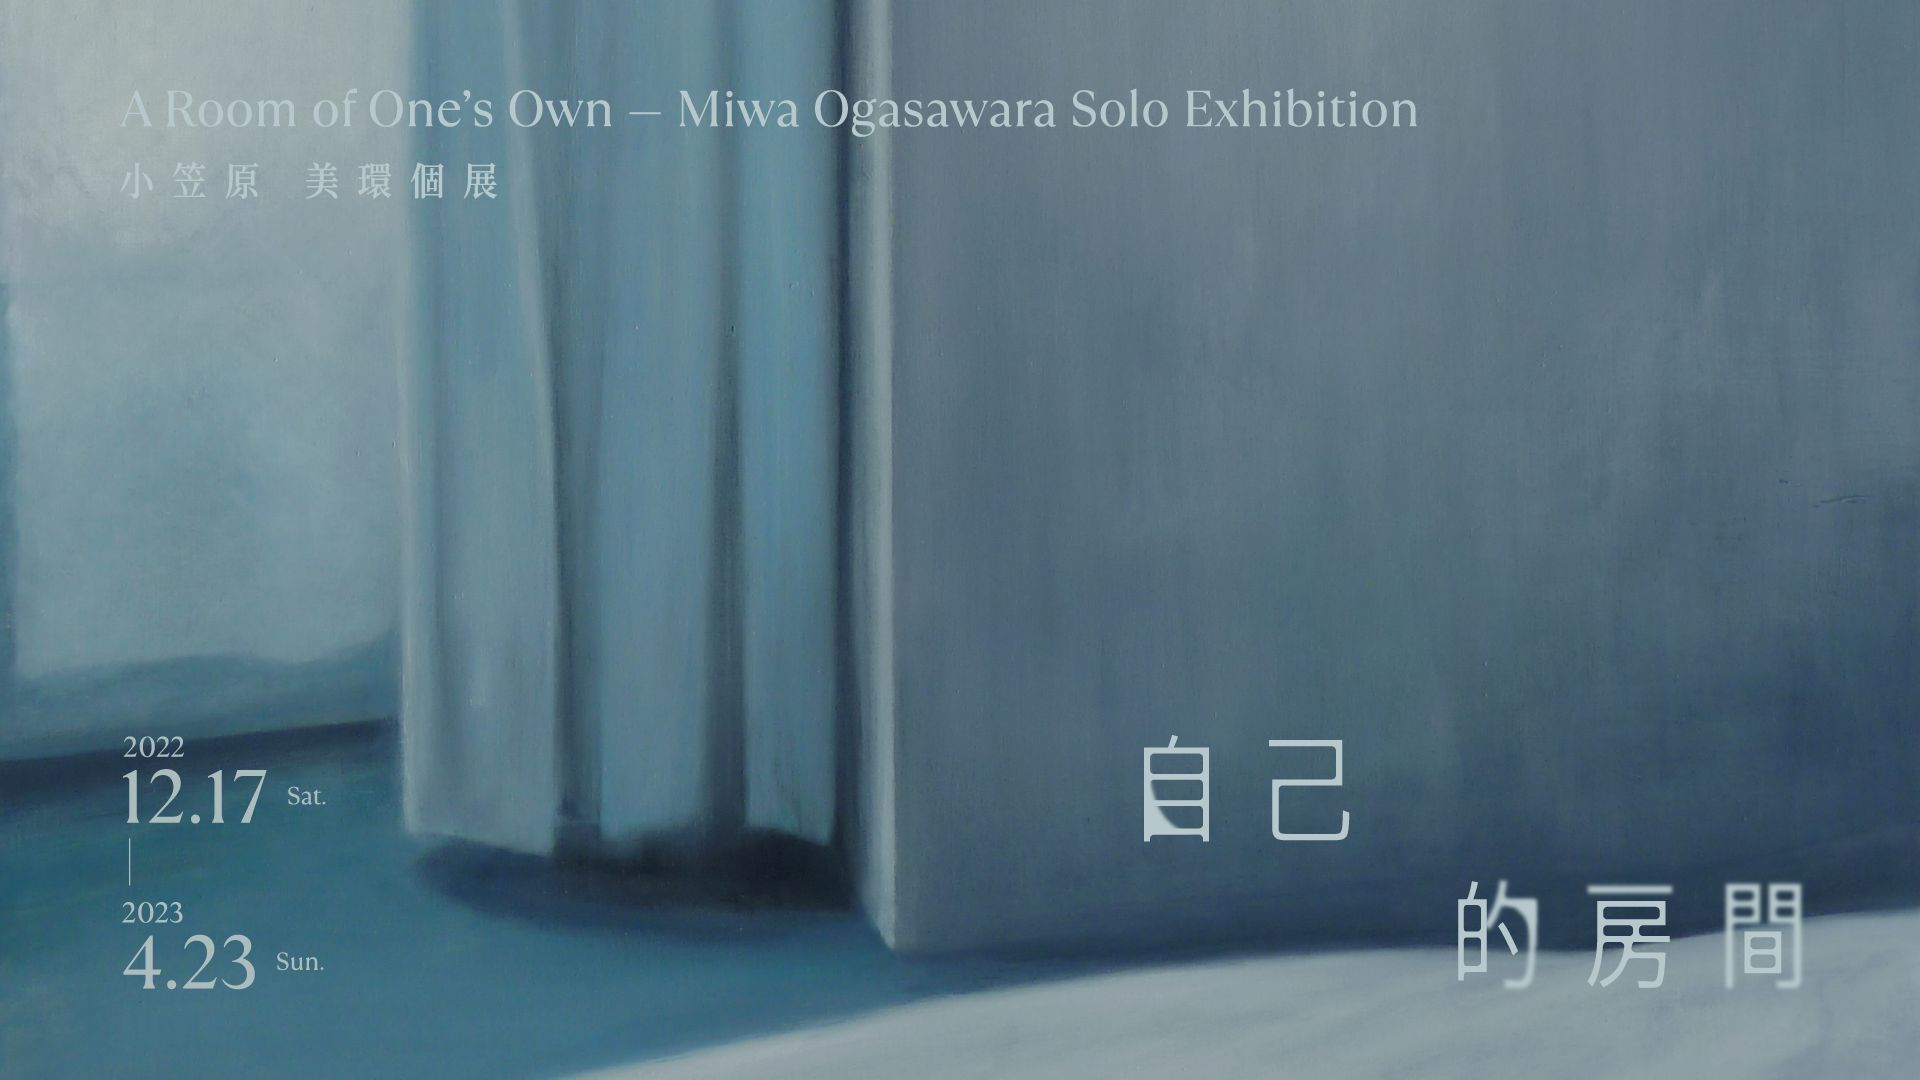 A Room of One’s Own — Miwa Ogasawara Solo Exhibition